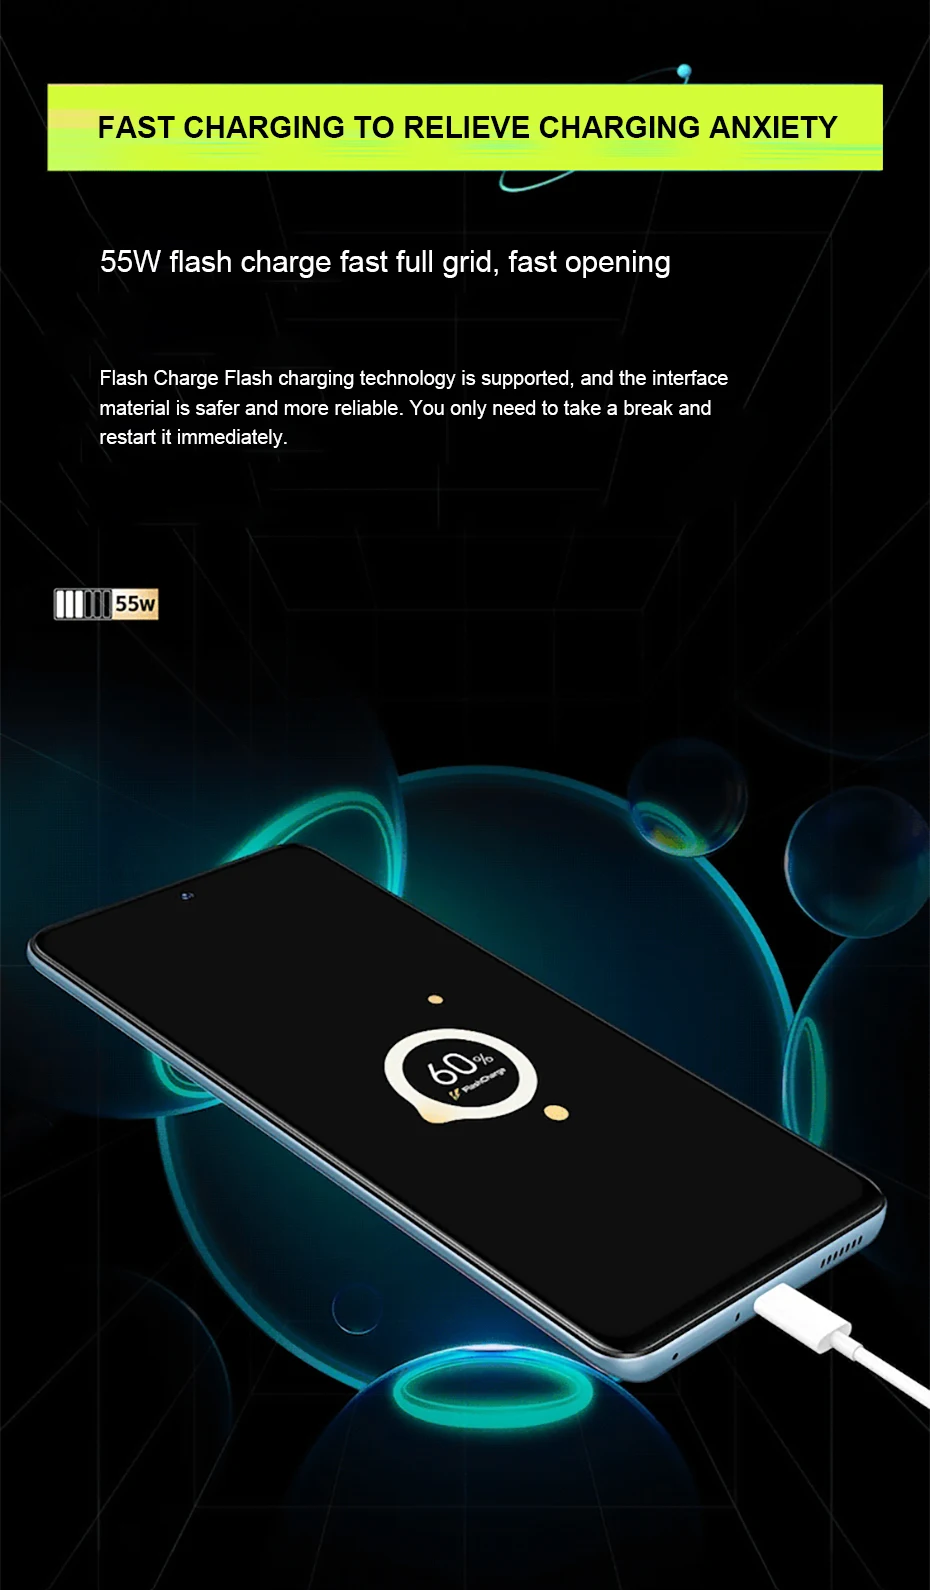 best ram for gaming Original New IQOO NEO 5 SE Smartphone Snapdragon 870 4500 mAh 55W Flash Charge 50MP Main Camera 6.67 Inch 144Hz Android 11 NFC best ram for gaming